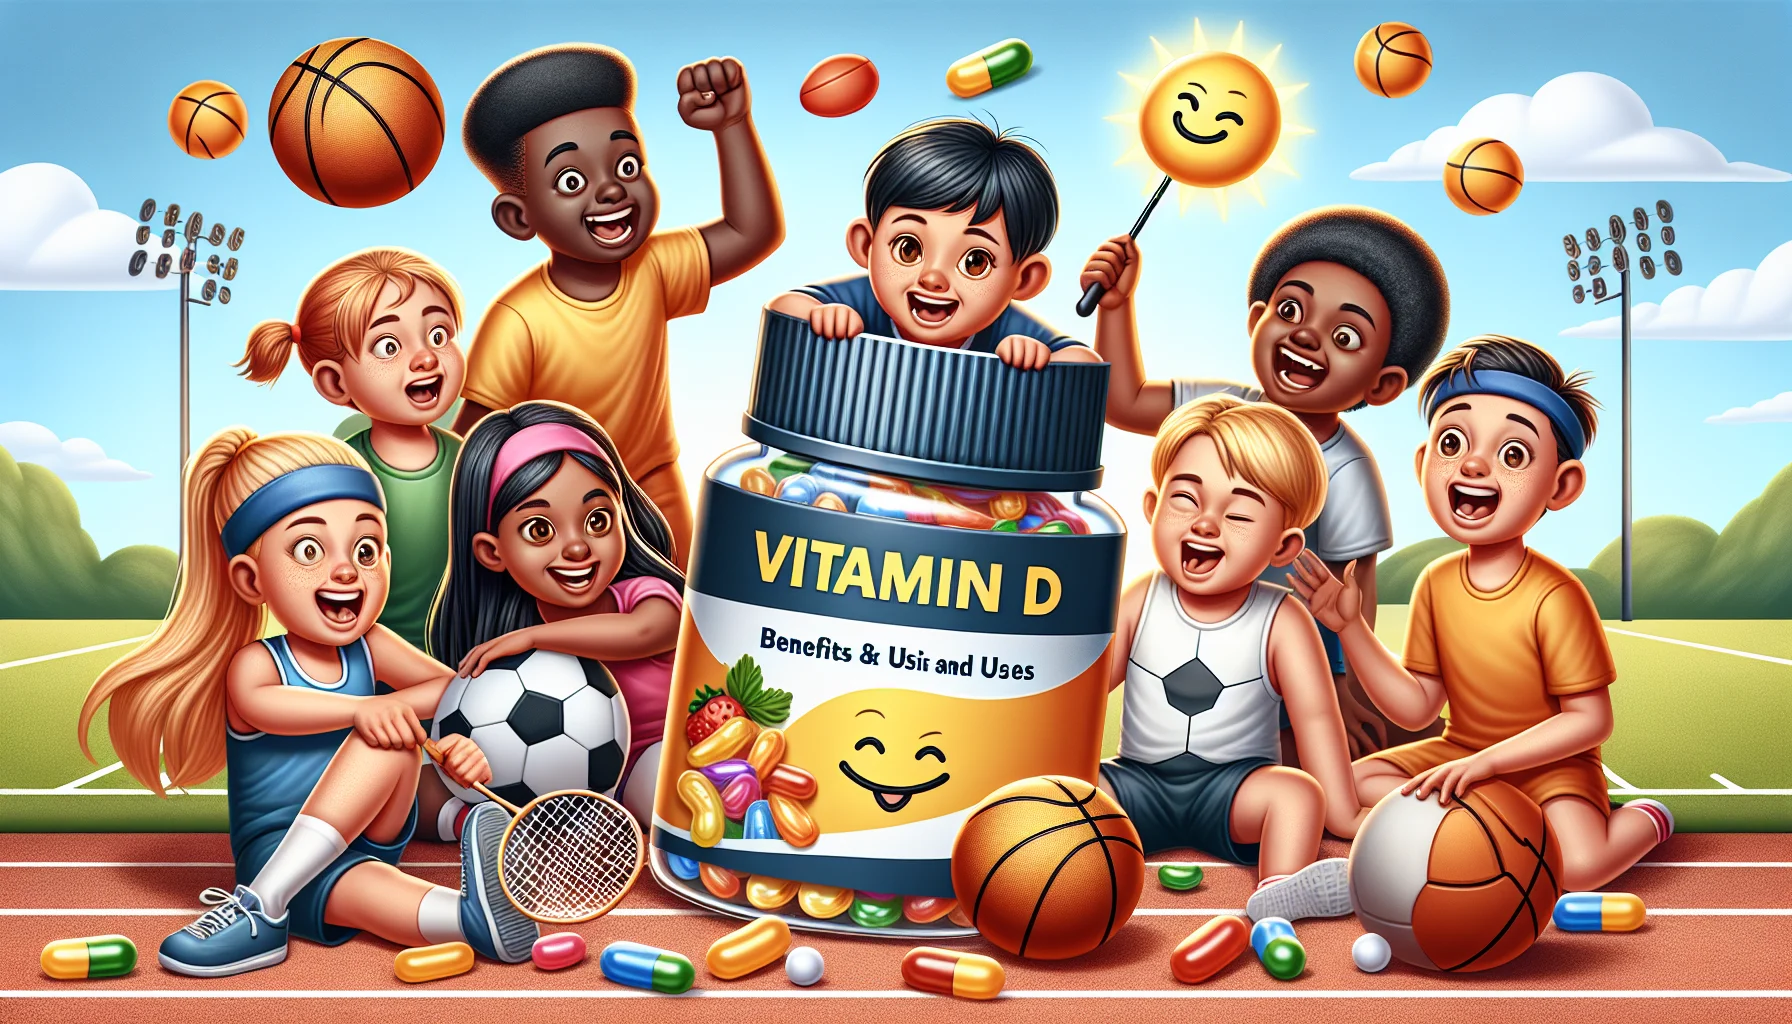 Create a playful image illustrating a scene where a group of kids of different descents such as Caucasian, Black, Middle-Eastern, Hispanic, South Asian, and White, are delightfully discovering a jar of vitamin D gummies. They are in a vibrant sports setting with footballs, basketballs, and badminton rackets around. The jar of gummies is humorously animated with smiley face, winking at the kids, trying to persuade them about the importance of vitamin supplements for sports activities. Include the benefits and uses as text on the jar, making it educational and fun.